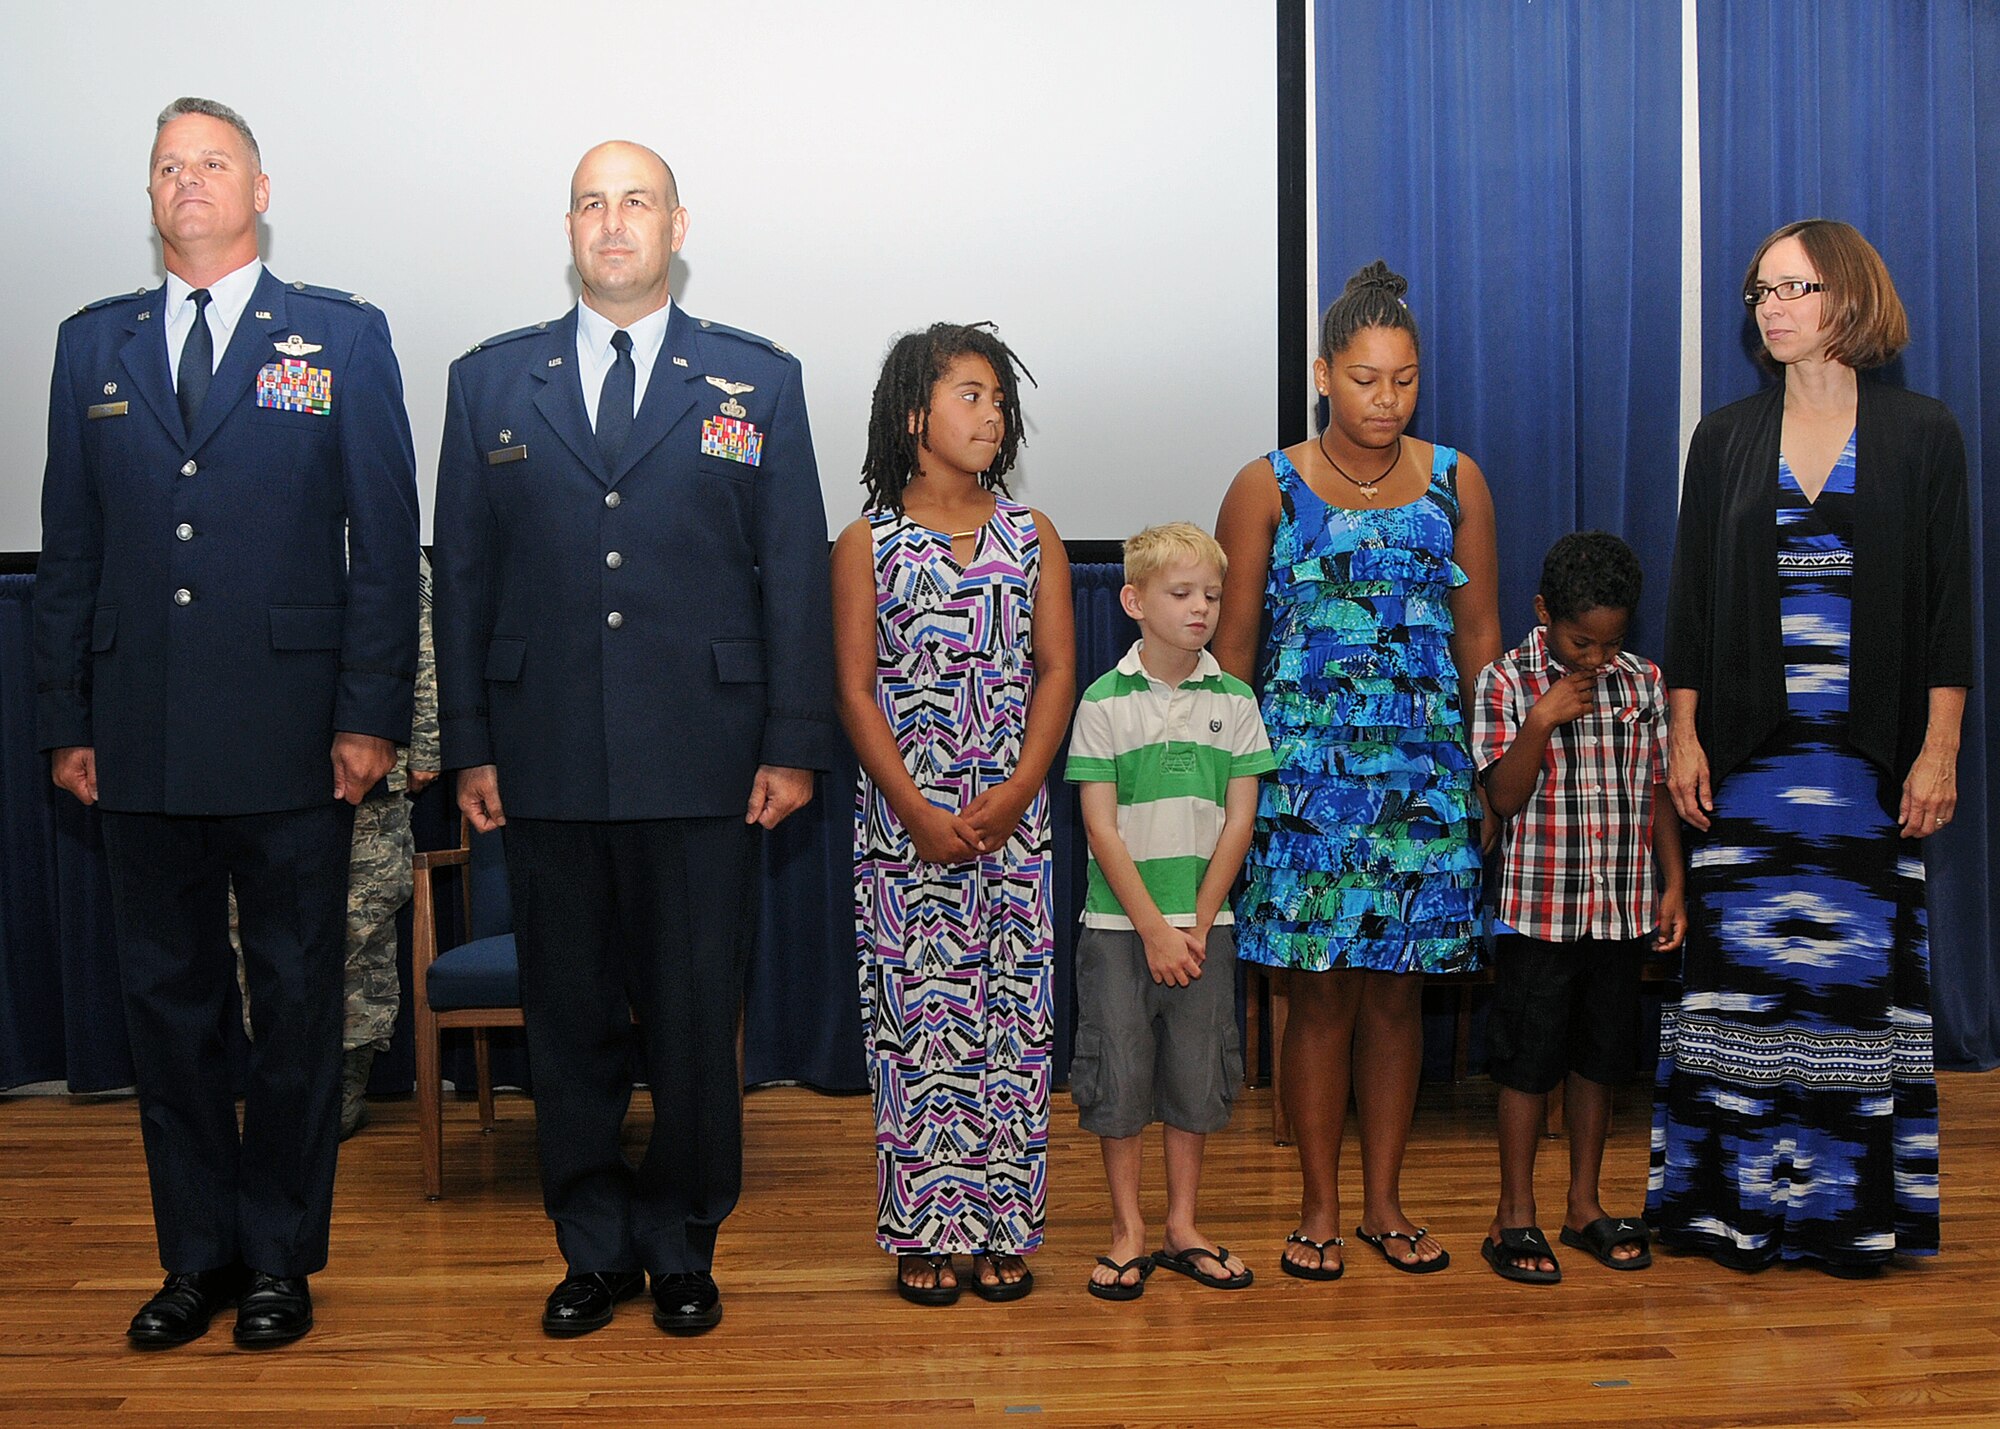 Colonel Arthur Floru, Commander, 143d Airlift Wing, Lieutenant Colonel Anthony Hamel, Commander, 143d Mission Support Group, and LtCol Hamel's family stand for the reading of the promotion order to promote LtCol Hamel to Colonel. National Guard photo by Master Sgt Janeen Miller